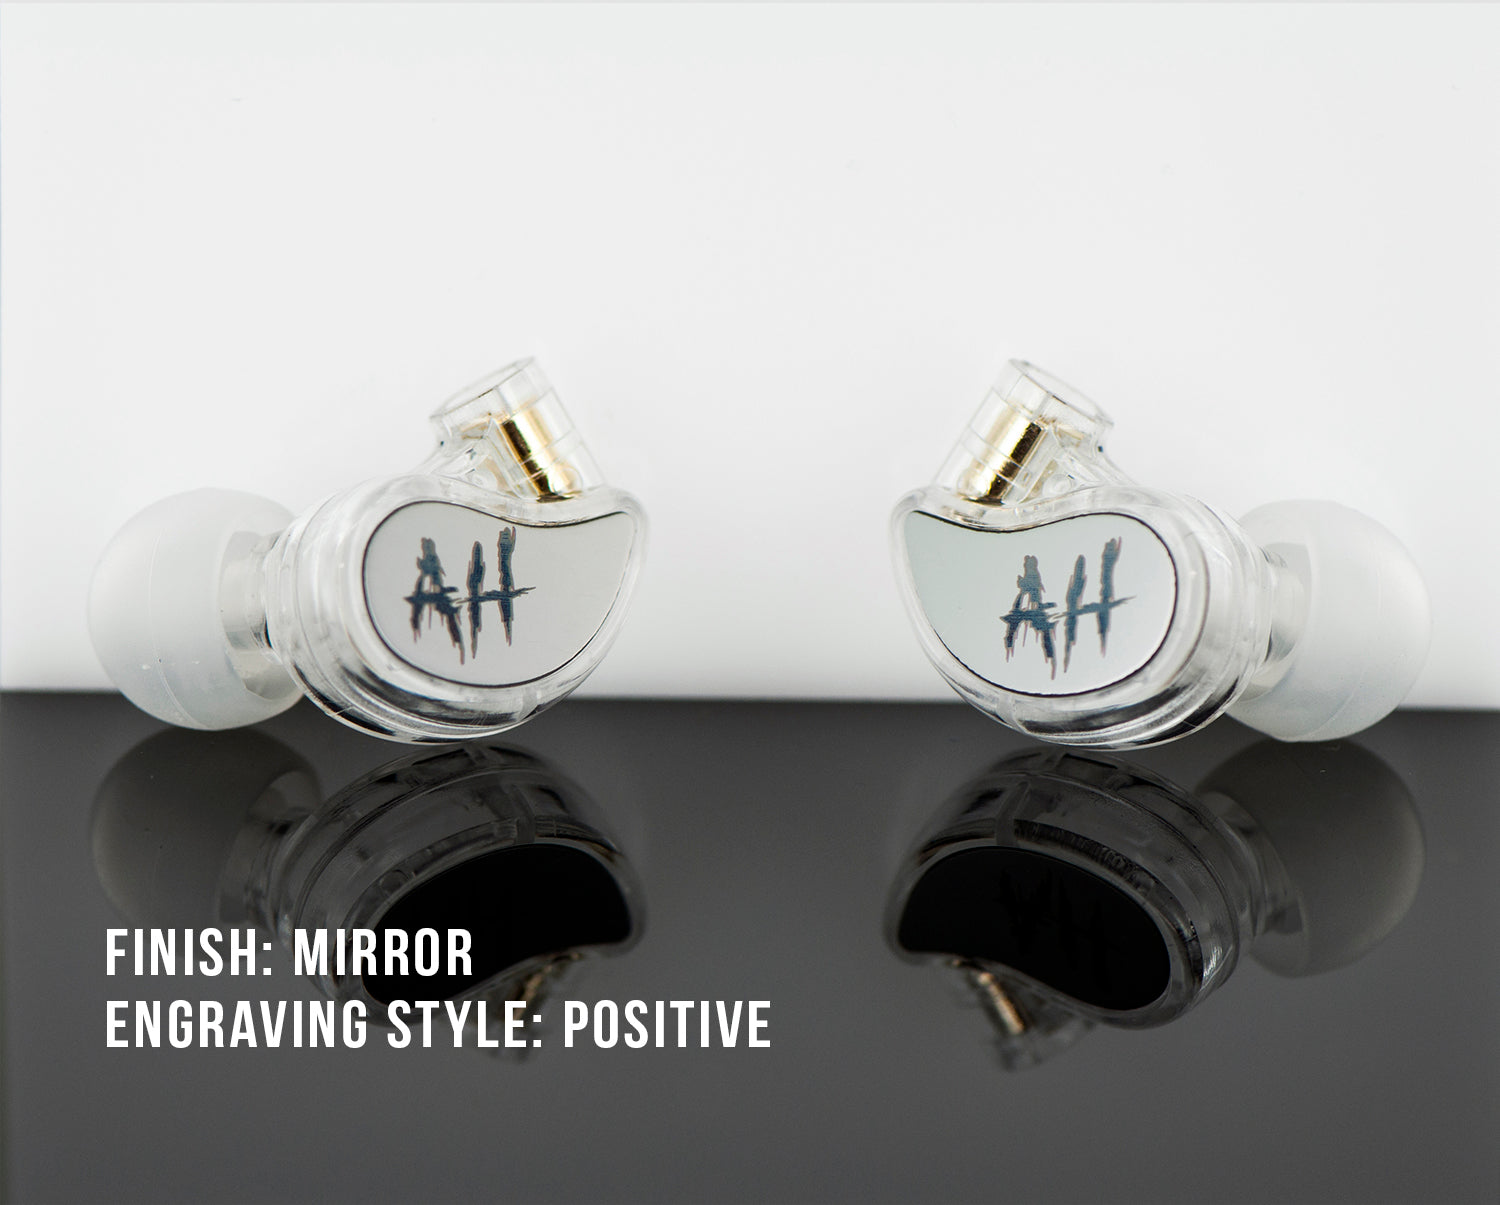 Two transparent heart-shaped earphones with the initials "ah" engraved in blue on a white background, reflecting on a shiny black surface. text: "finish: mirror engraving style: positive.